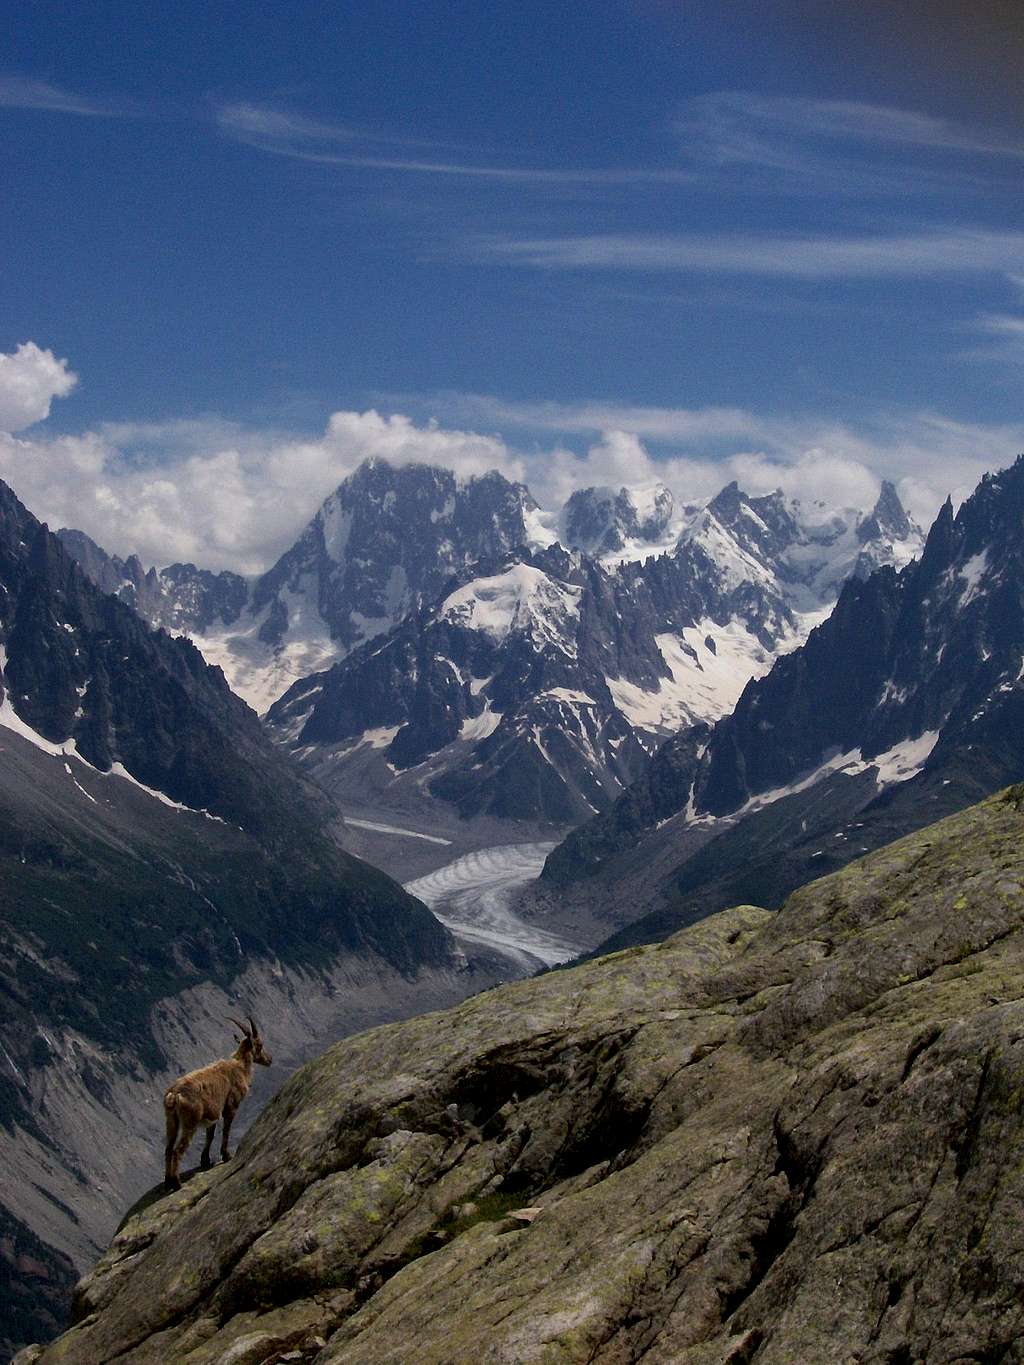 Mountain goat and Mt. Blanc Range In Background